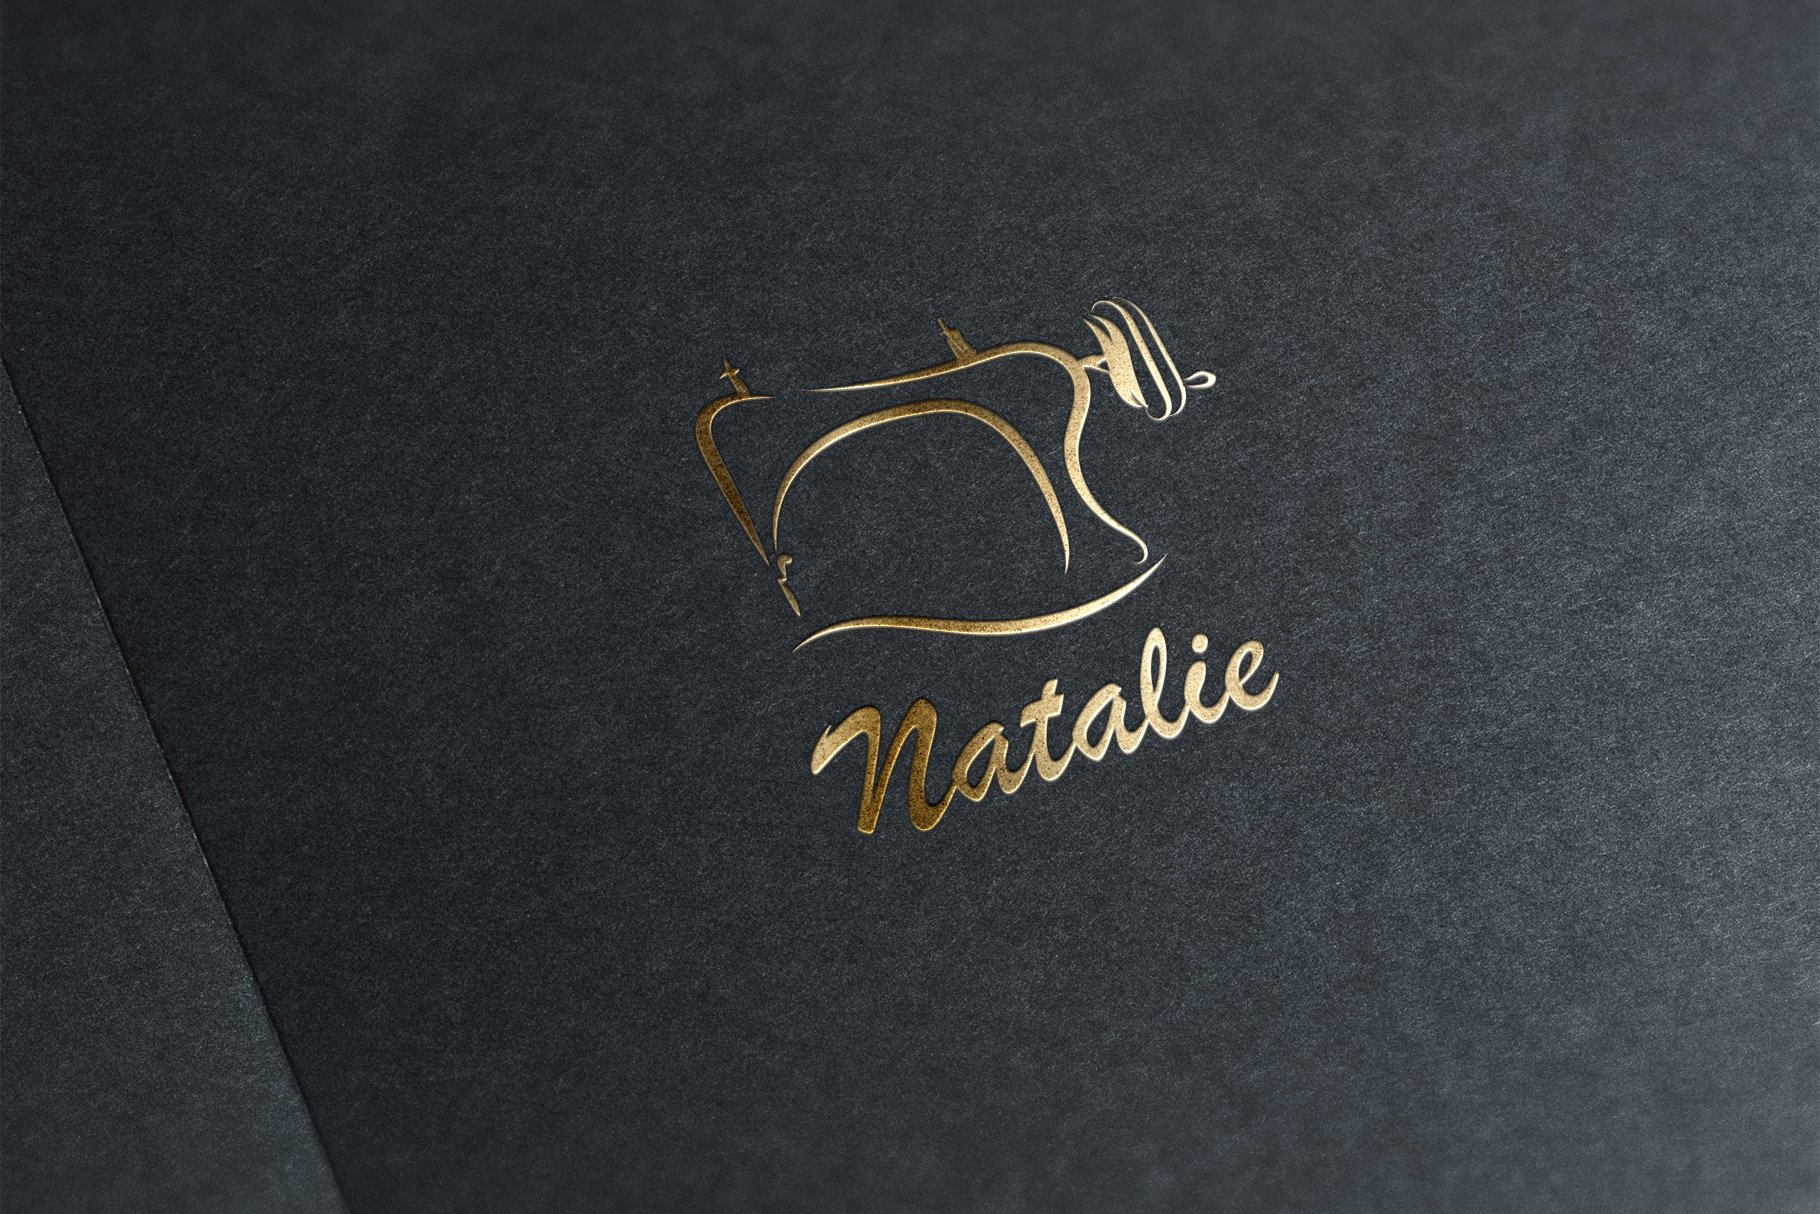 Natalie. Calligraphic Logo Template cover image.